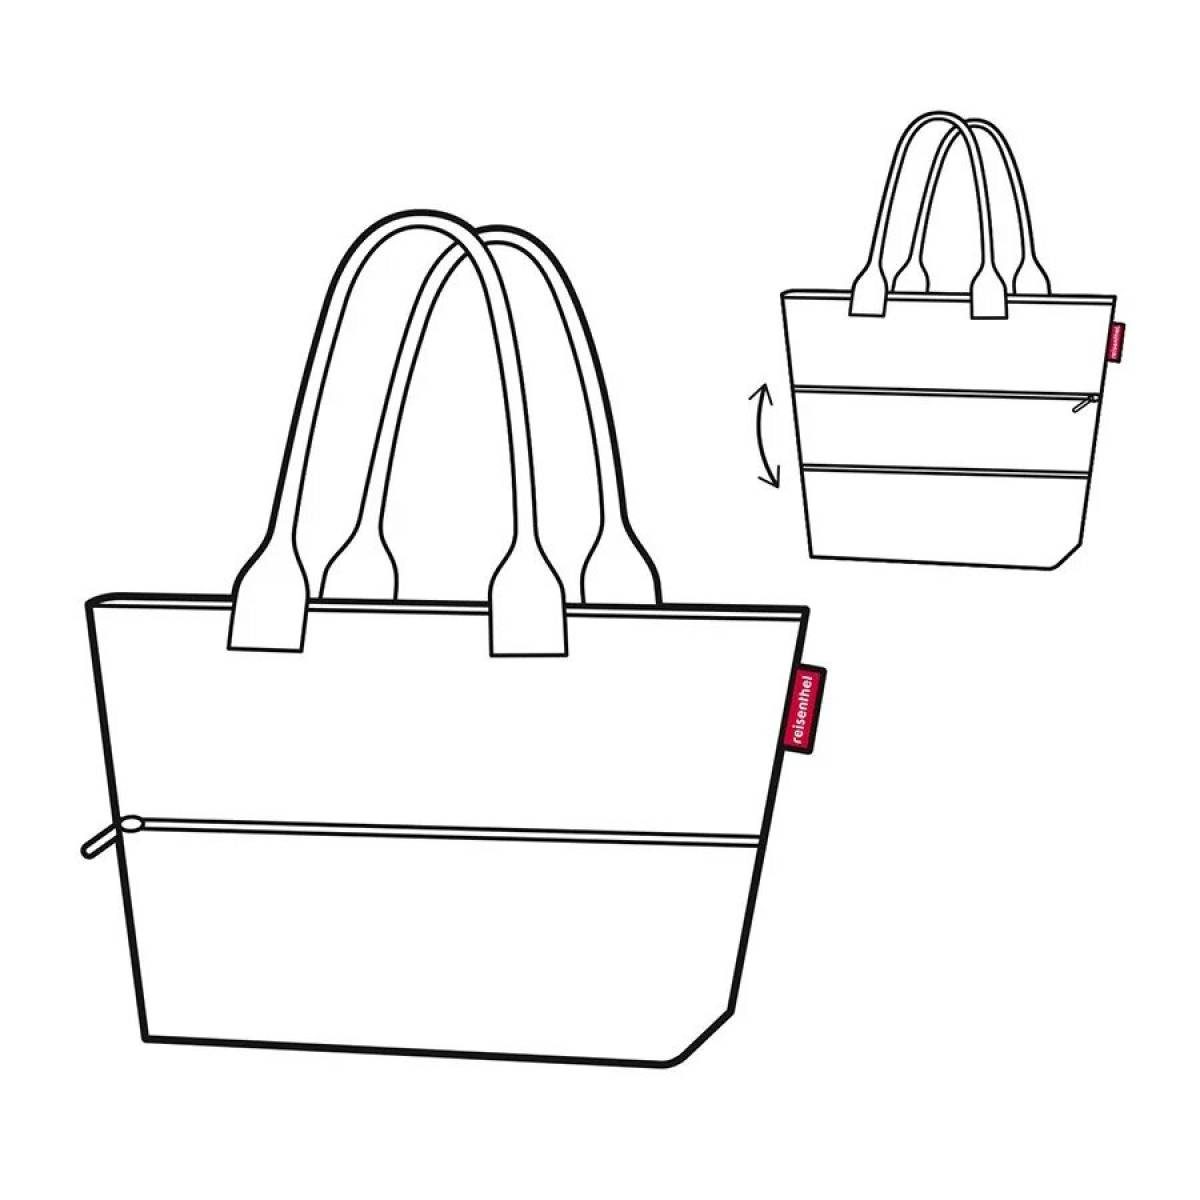 Attractive shopping bag coloring